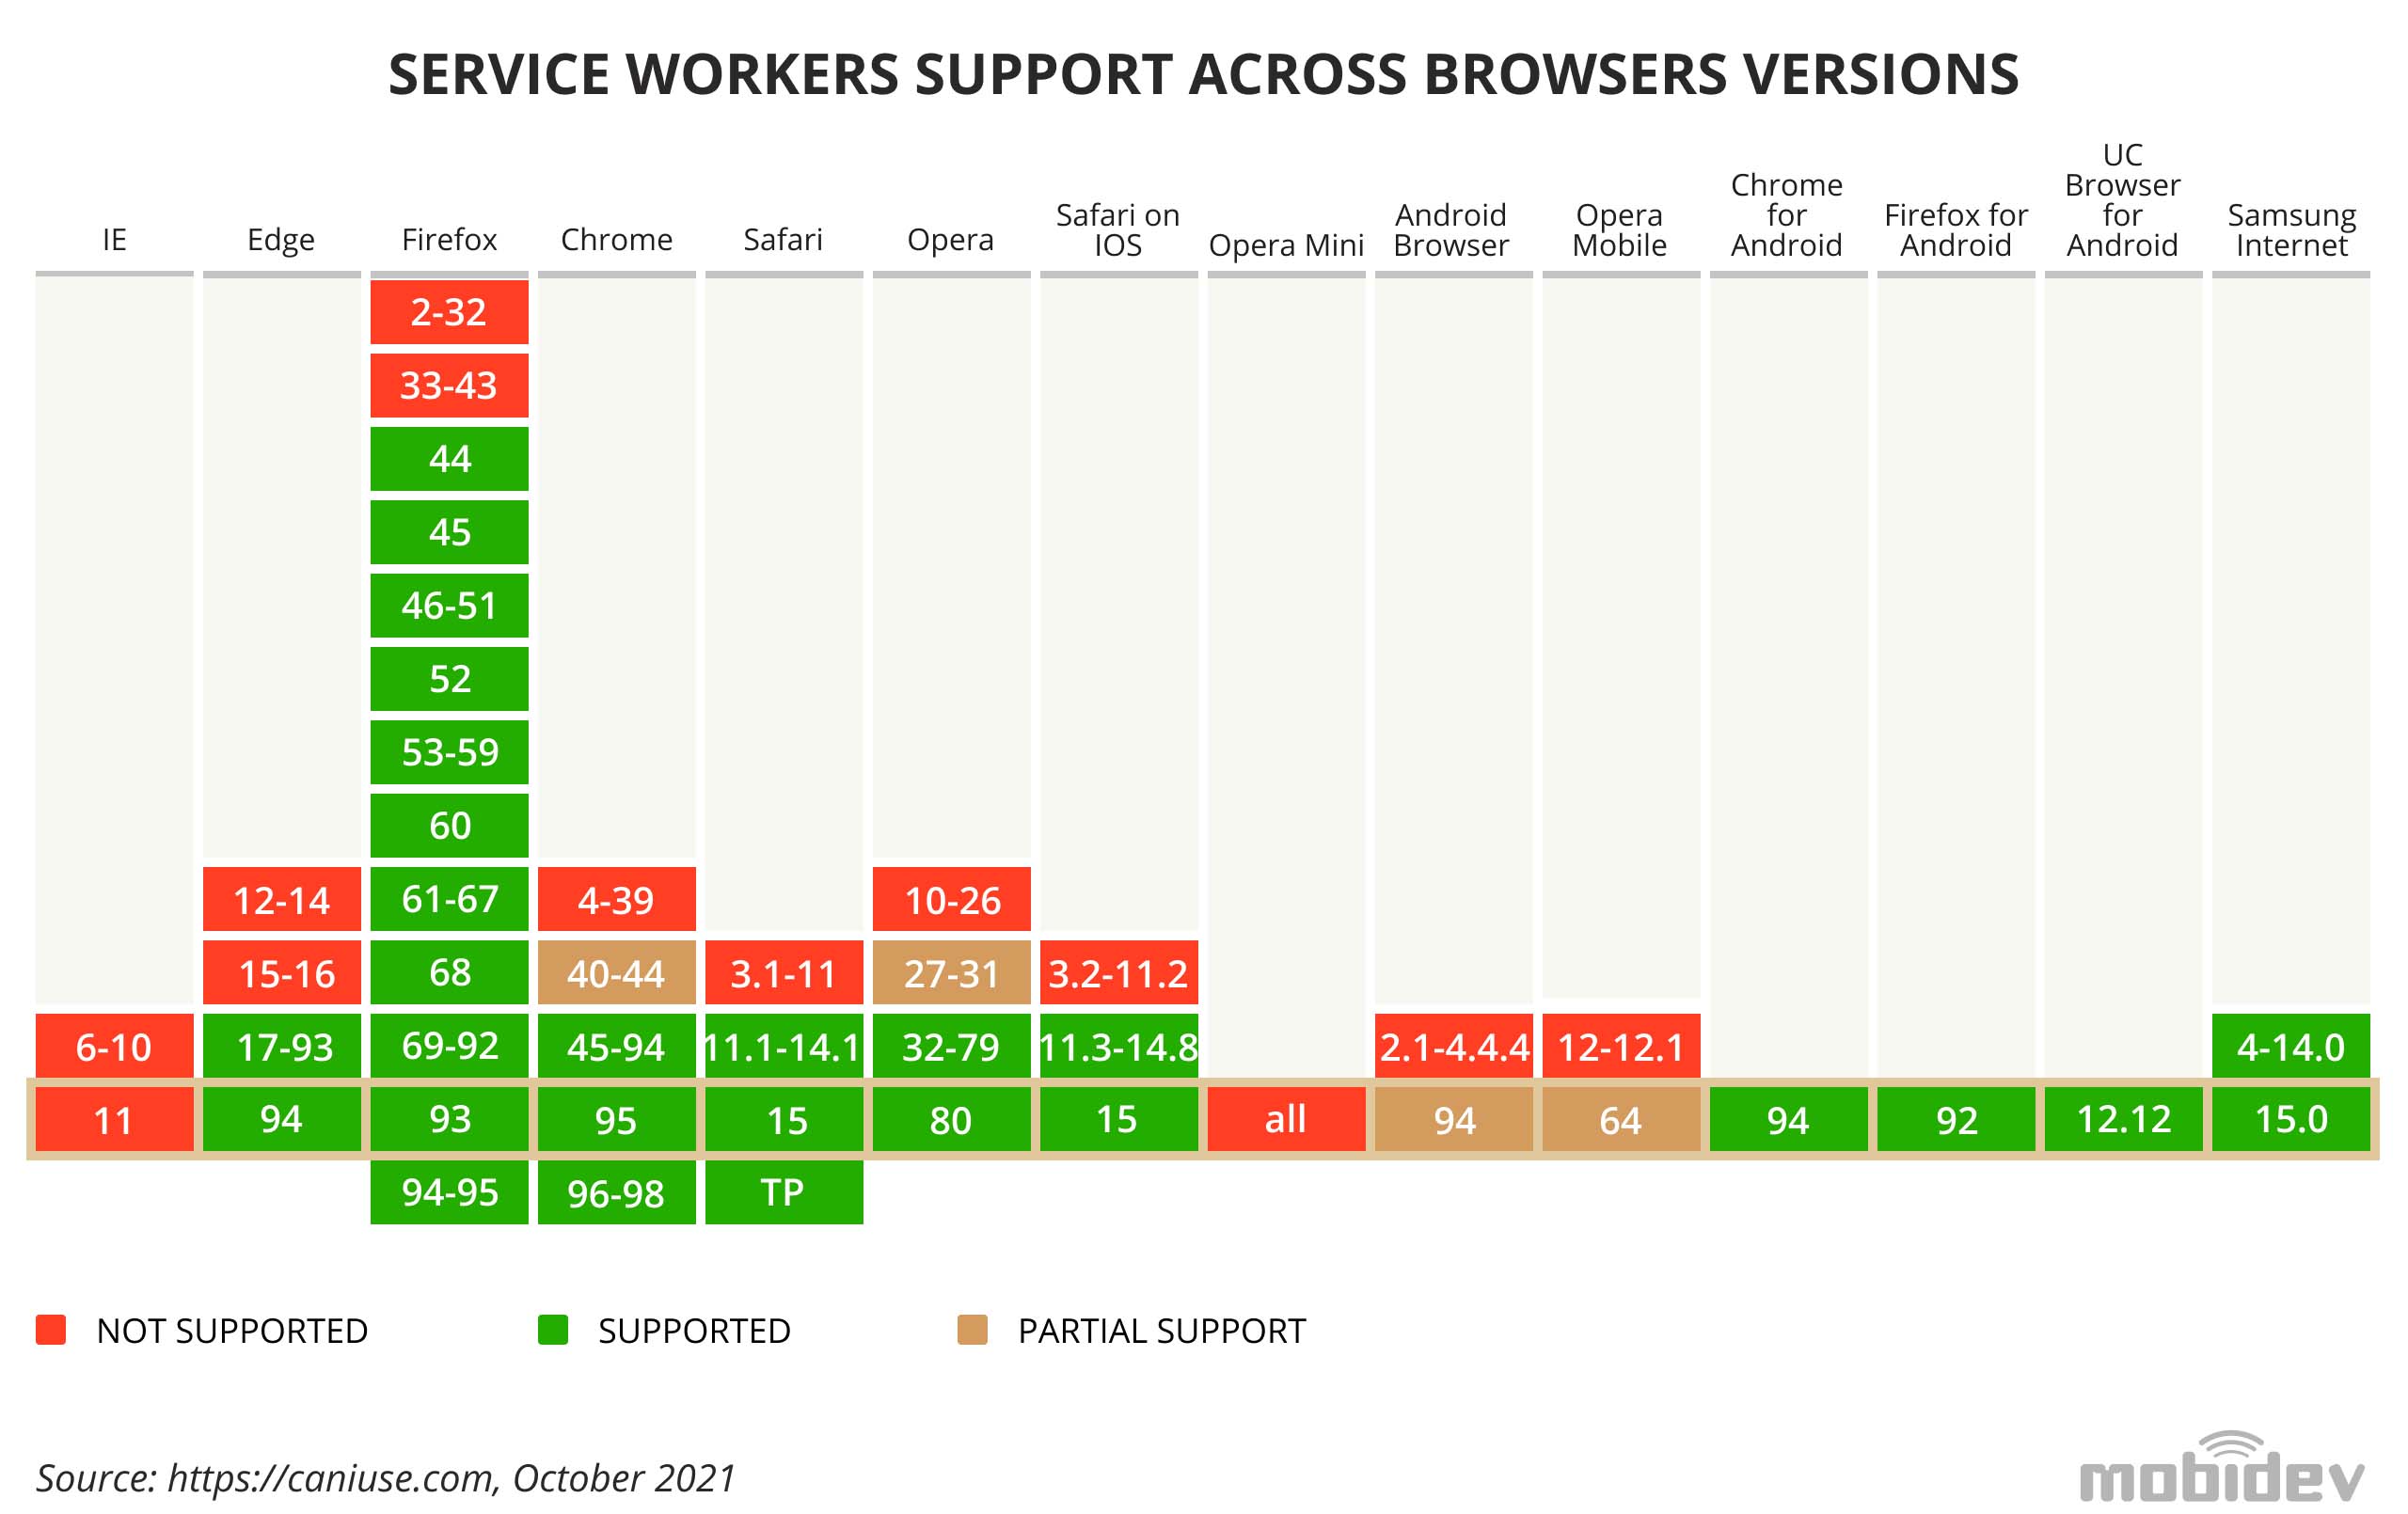 PWA Support Across Browsers and Platforms in 2021